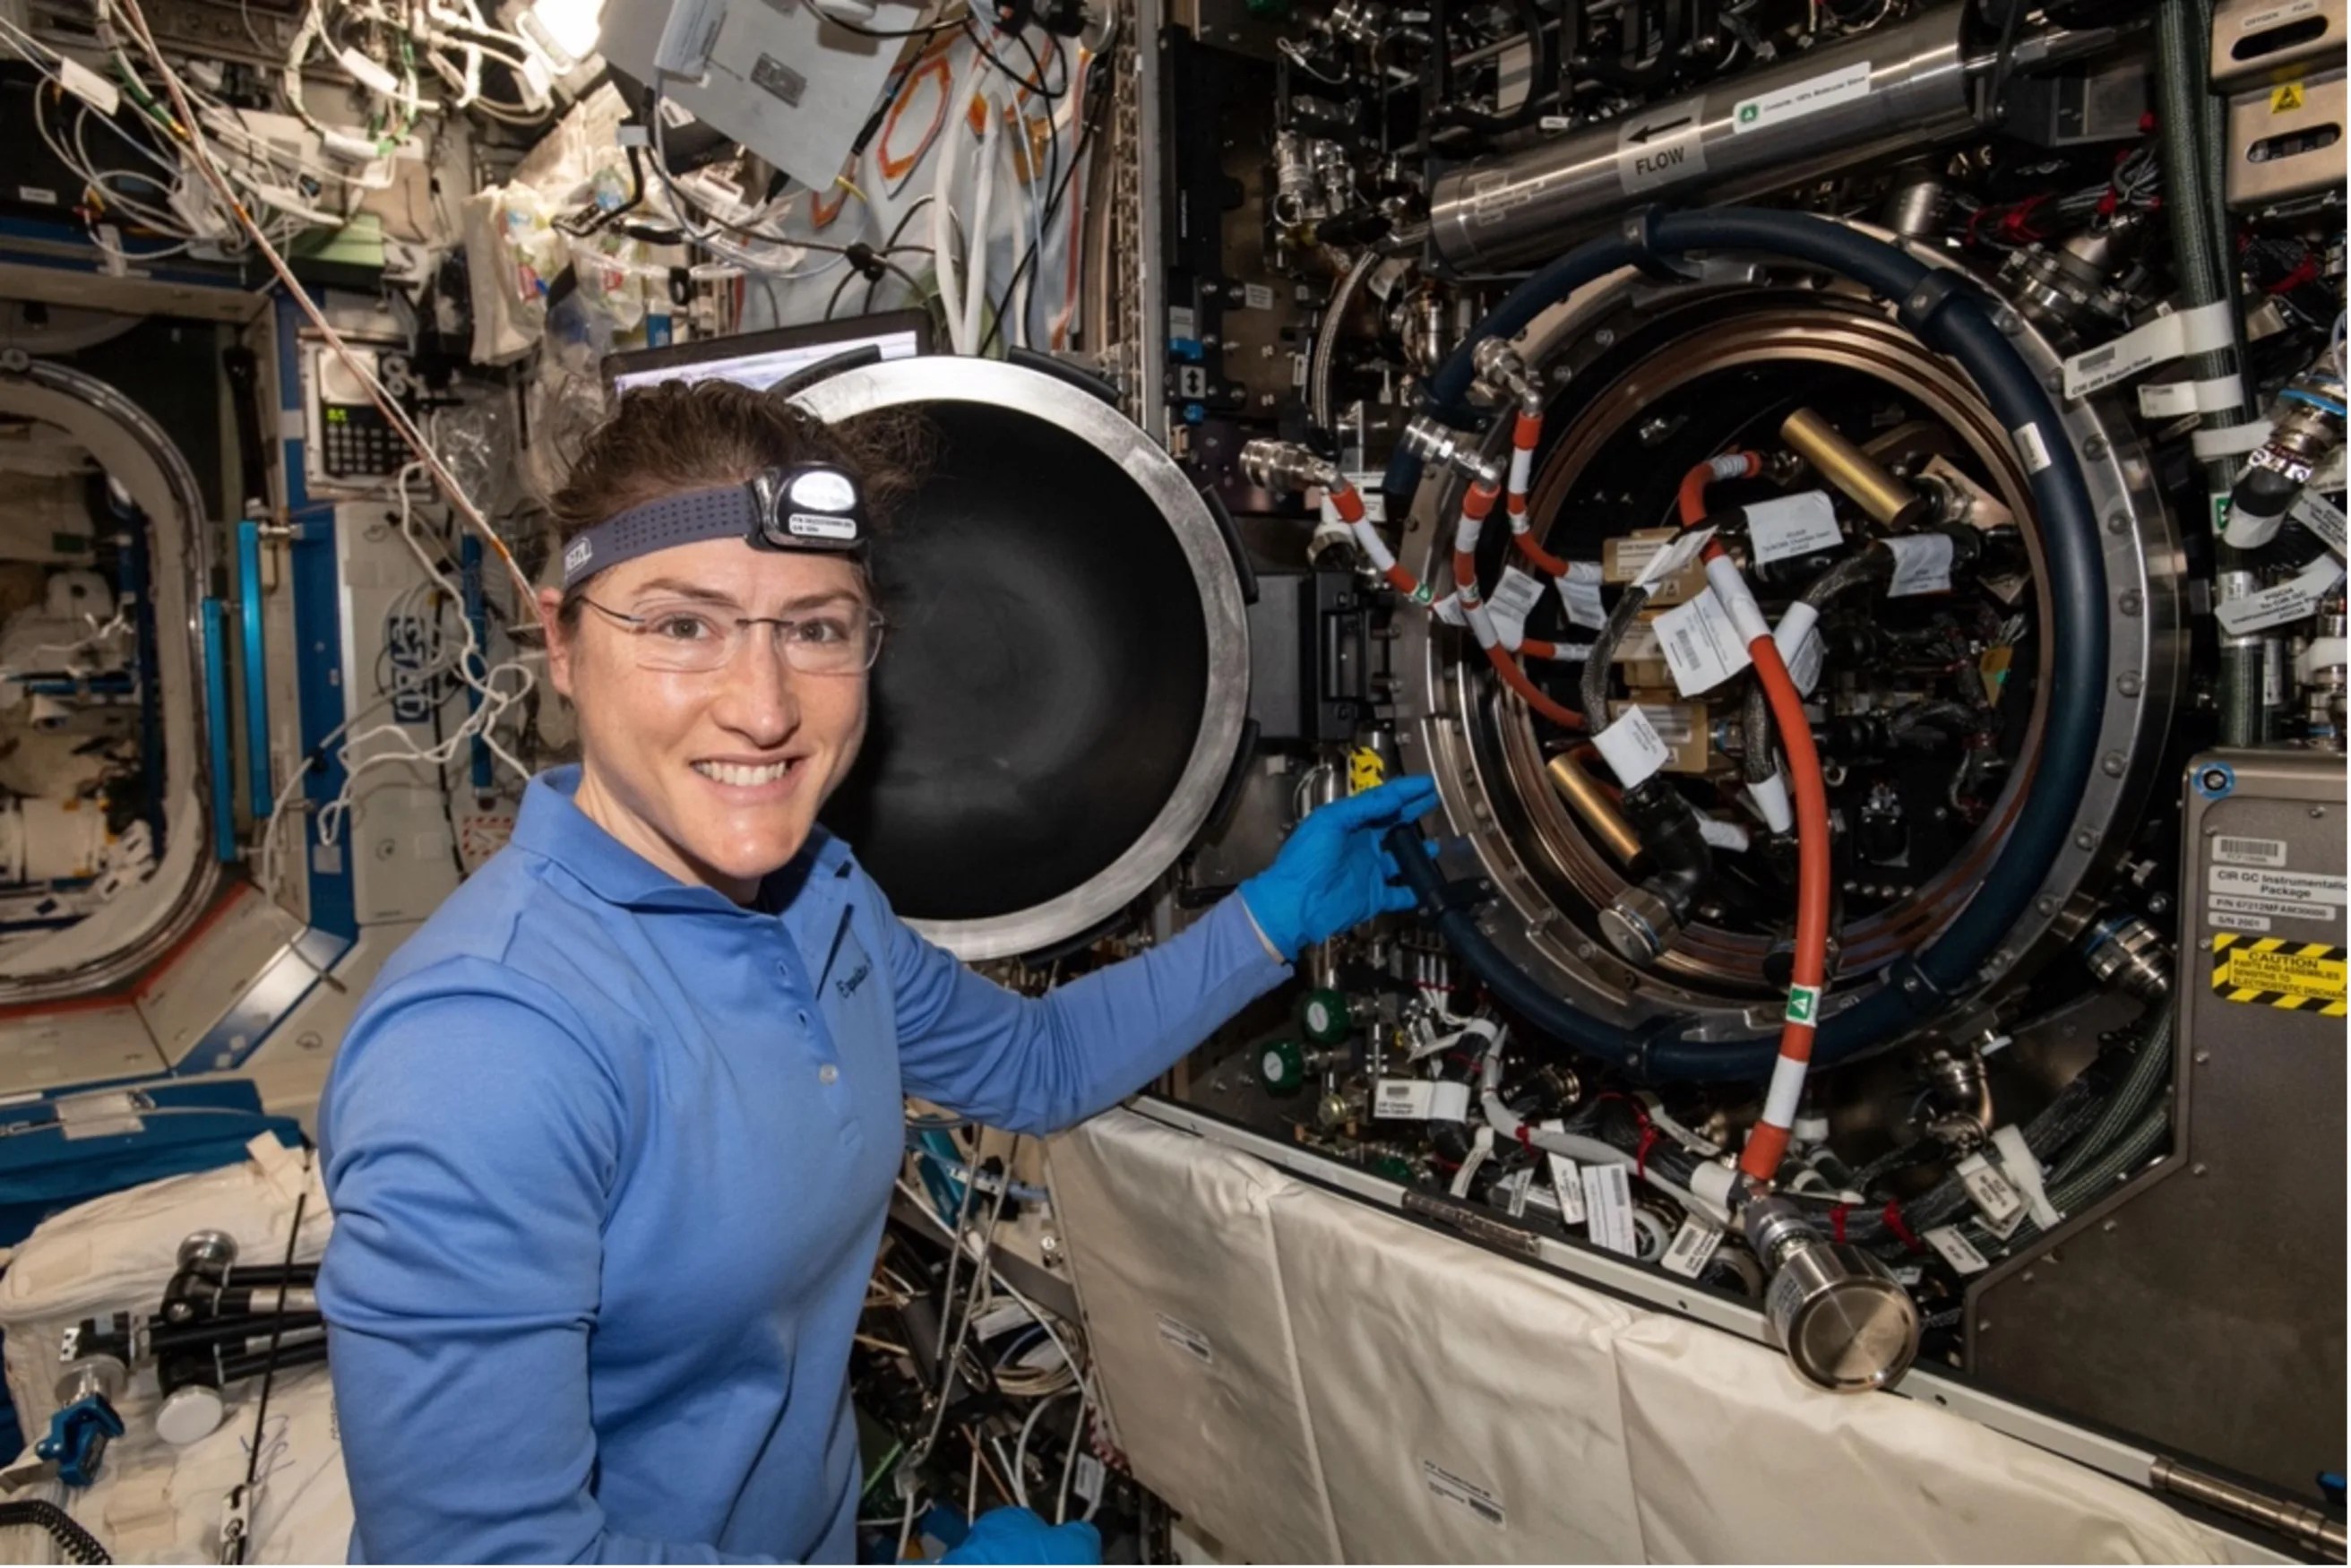 Female astronaut next to an open circular area onboard the International Space Station with red tubes and other mechanics inside.